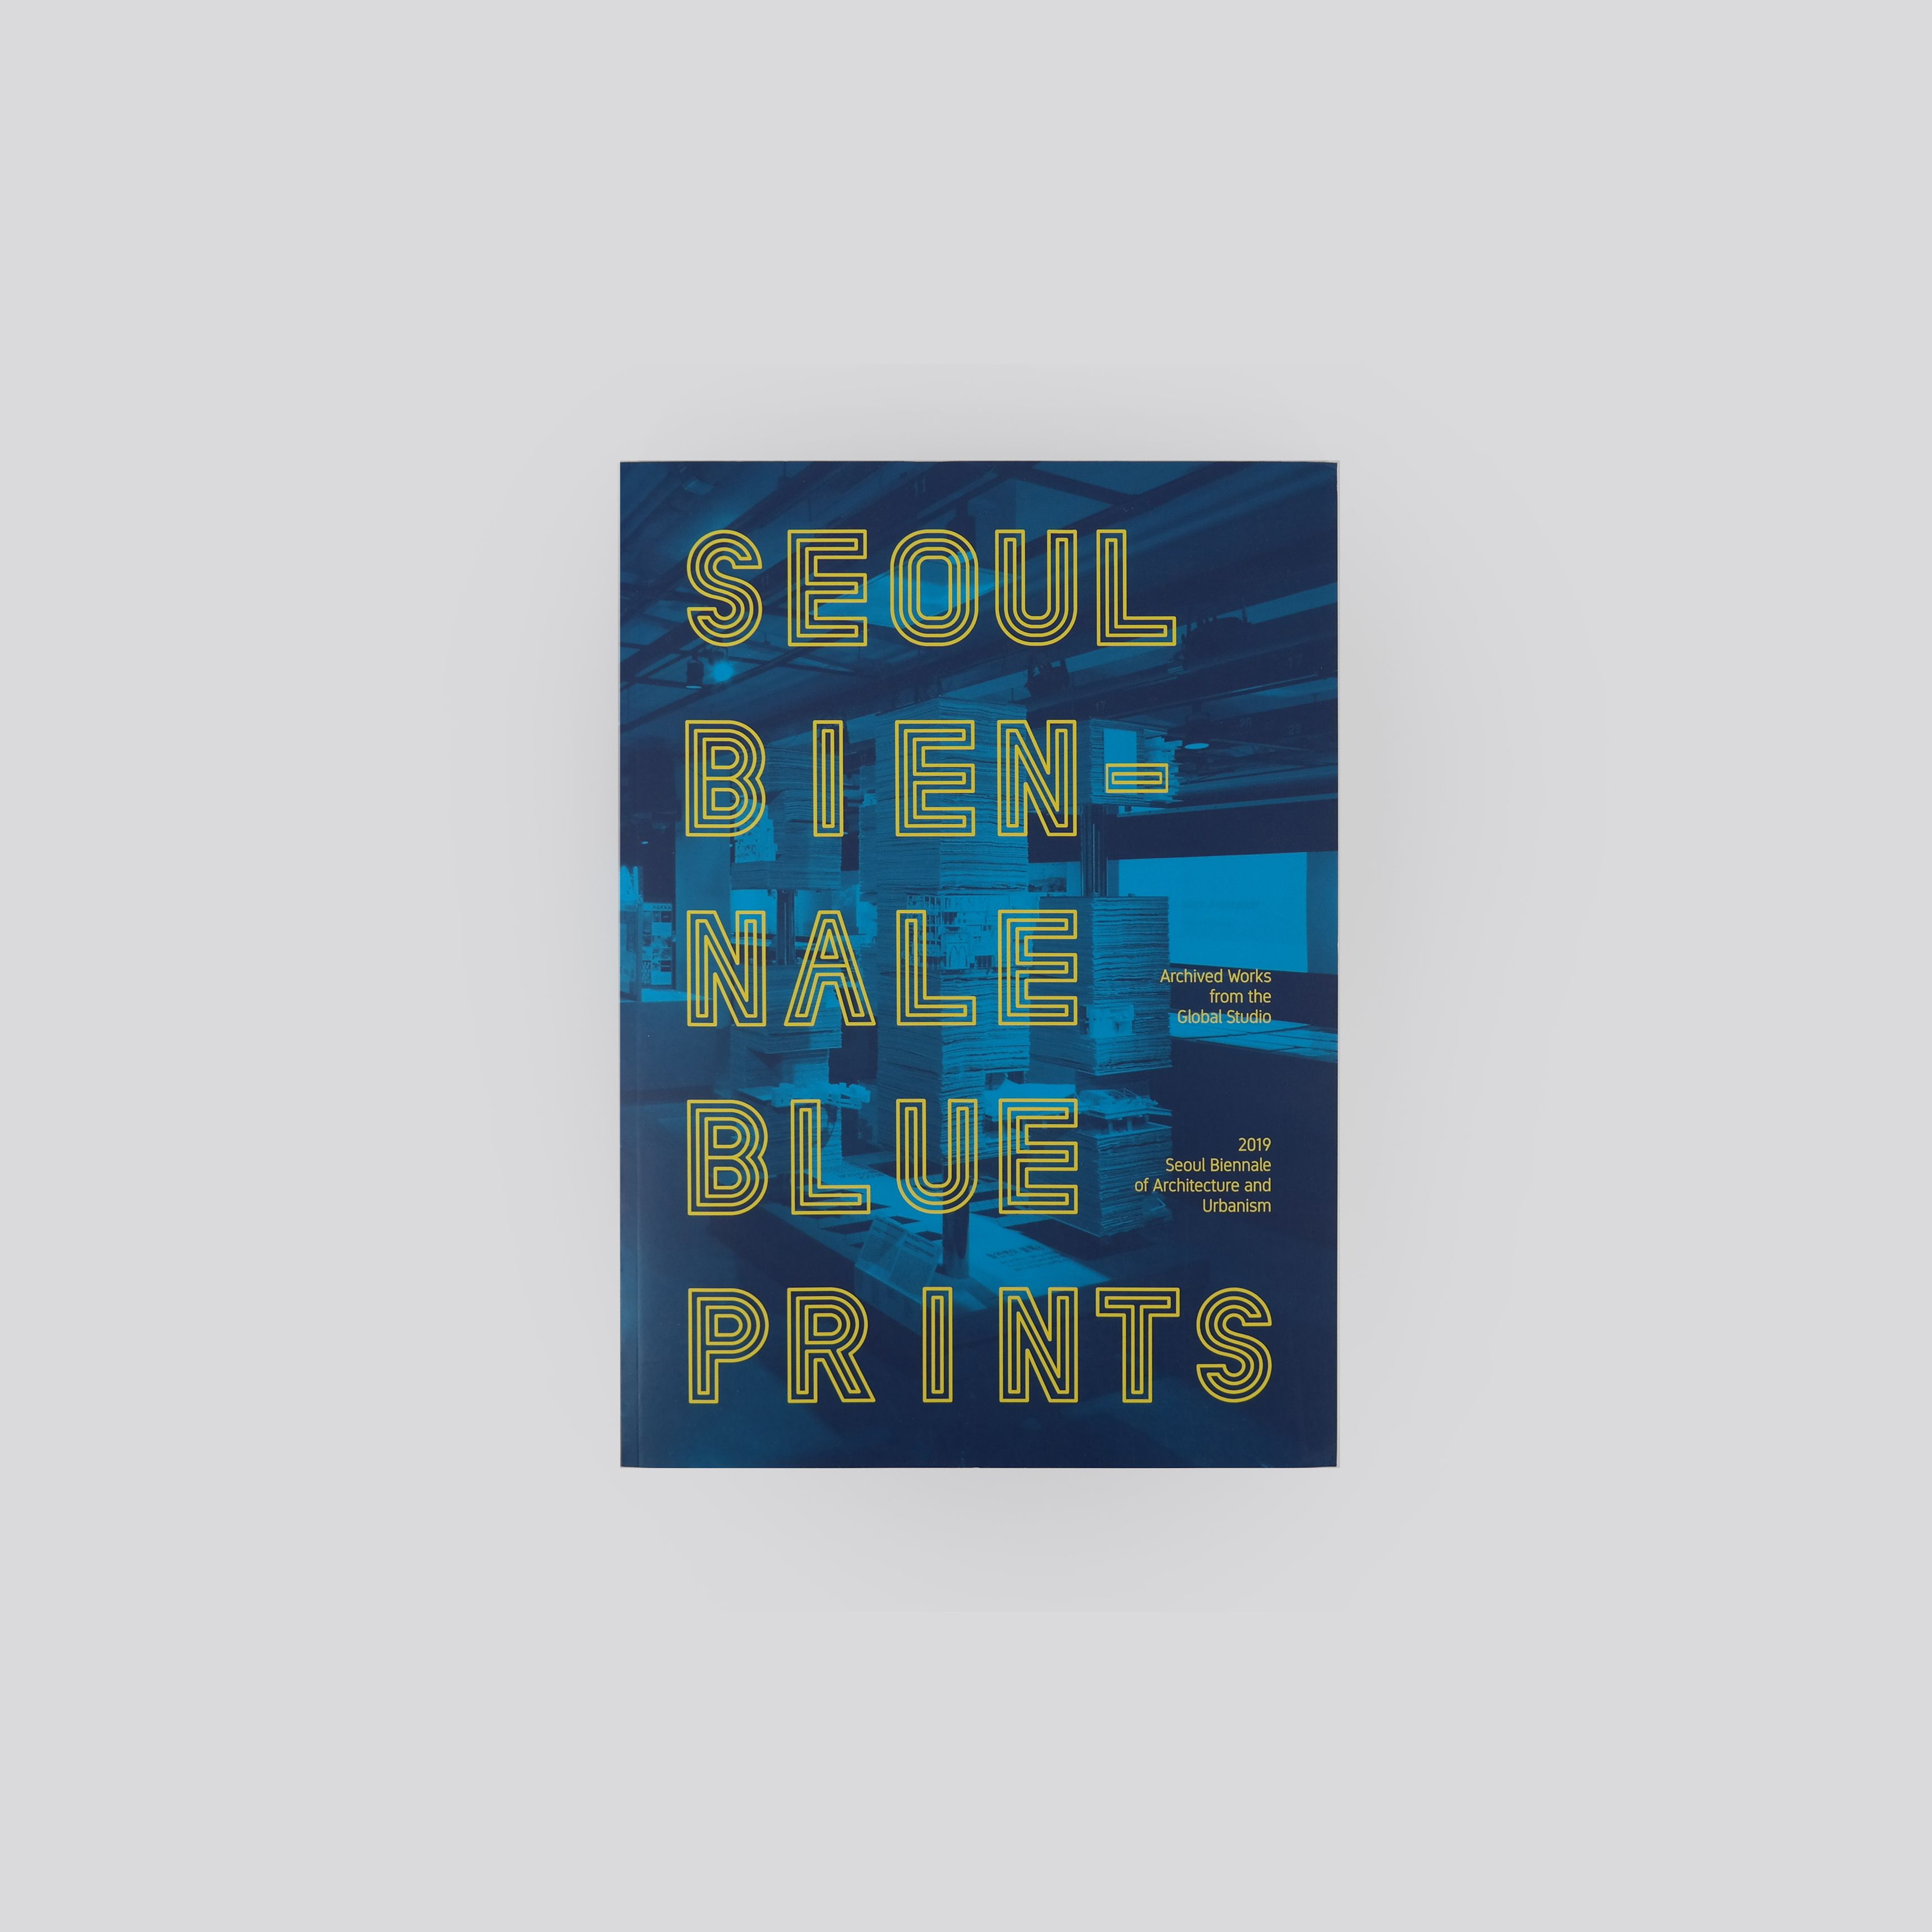 2019 Seoul Biennale of Architecture and Urbanism Blue Prints - Archived Works from the Global Studio